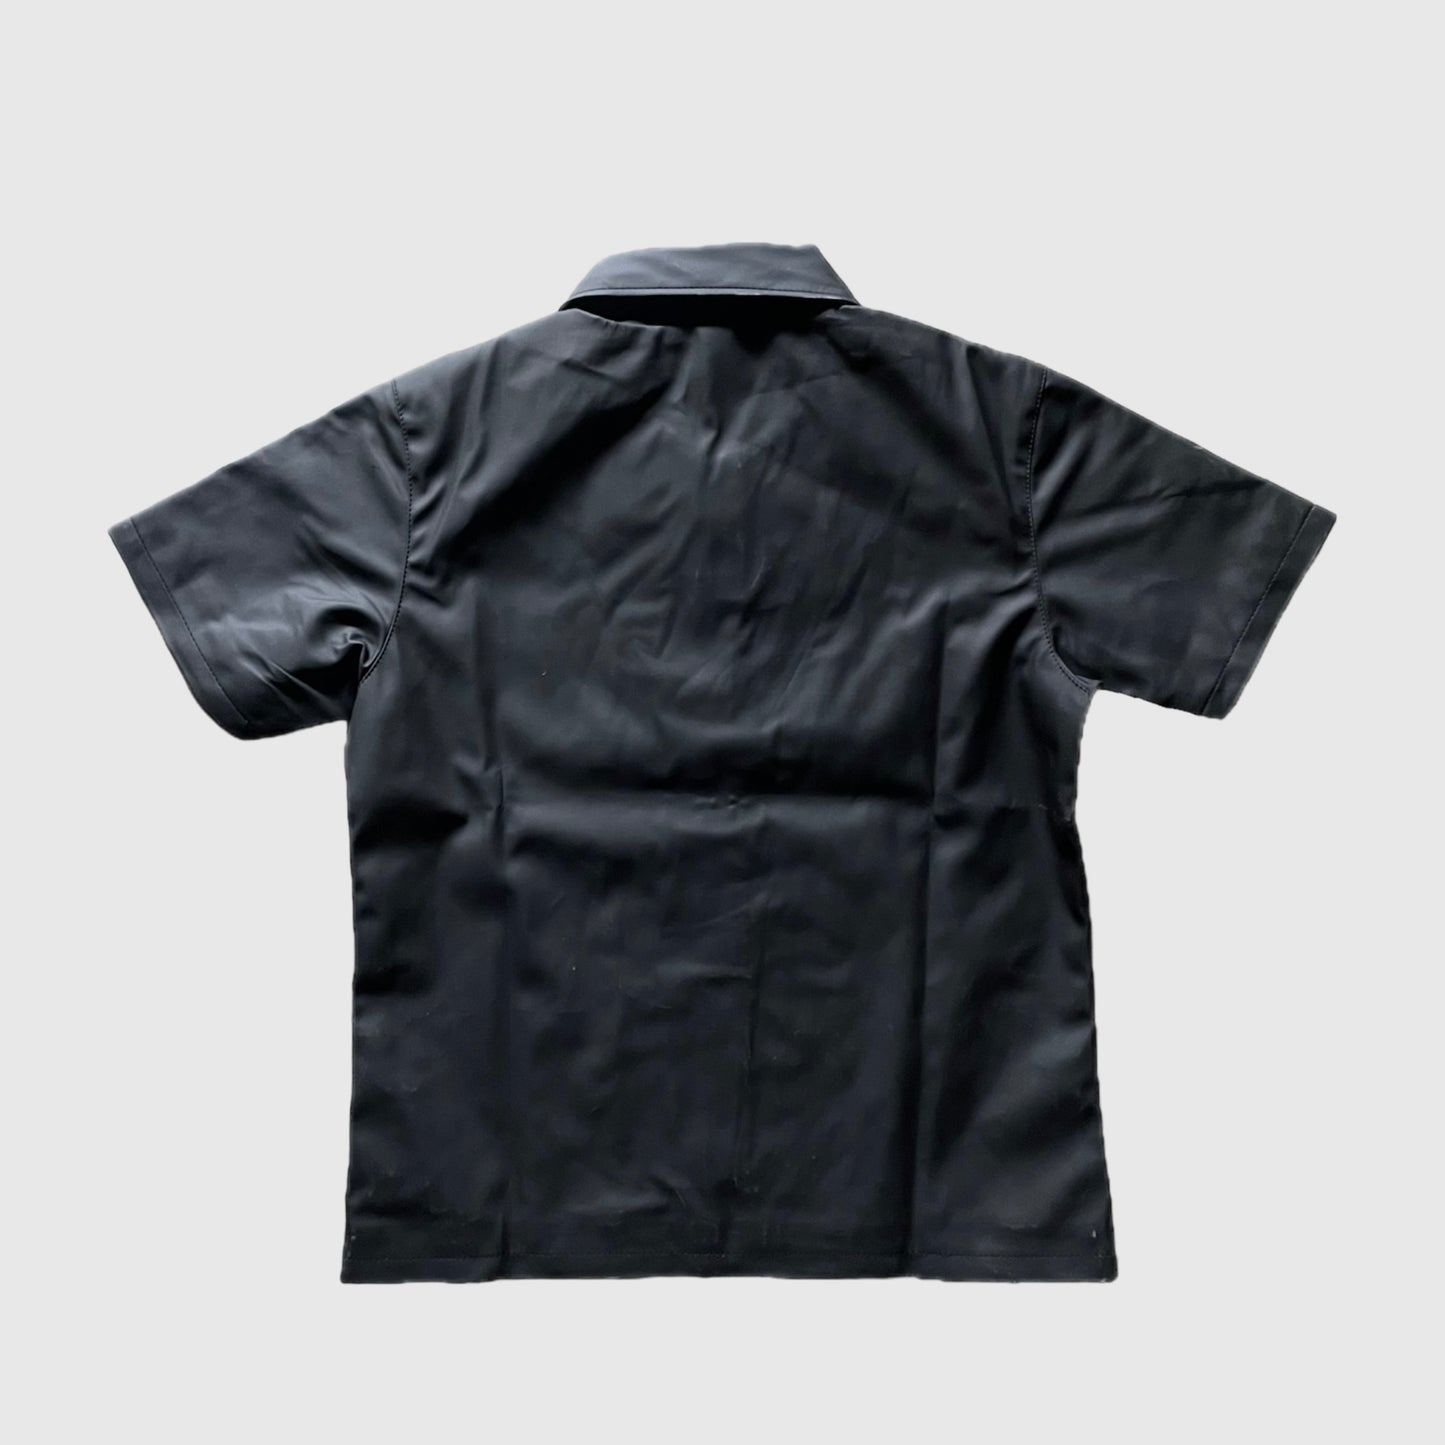 RIOT LEATHER SHIRT